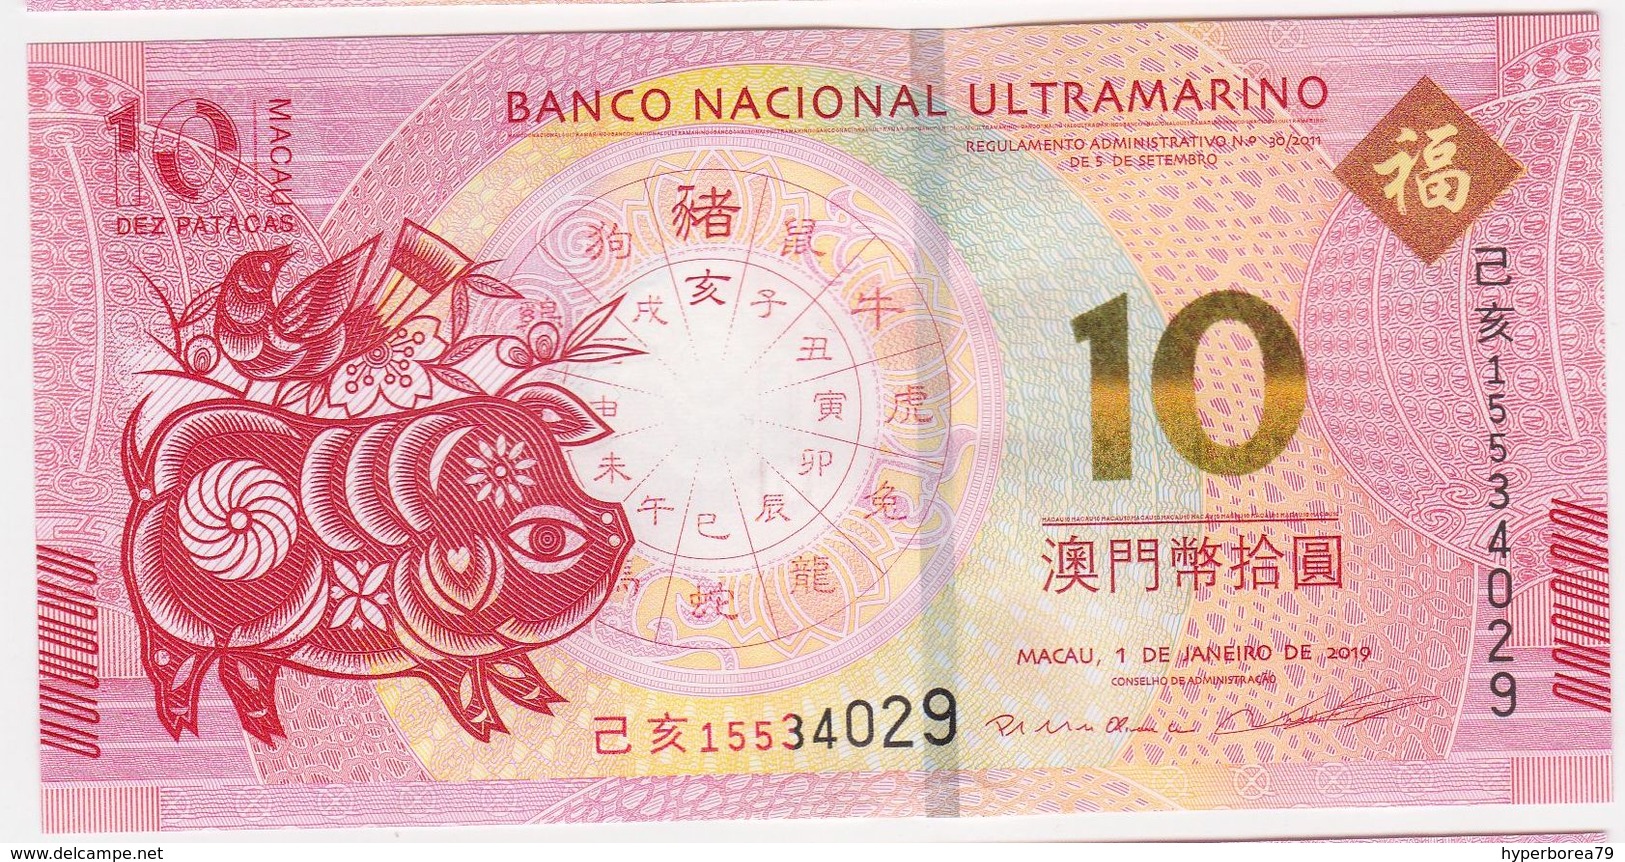 Macao BNU - 10 Patacas 1.1.2019 Year Of The Pig - UNC - Macao